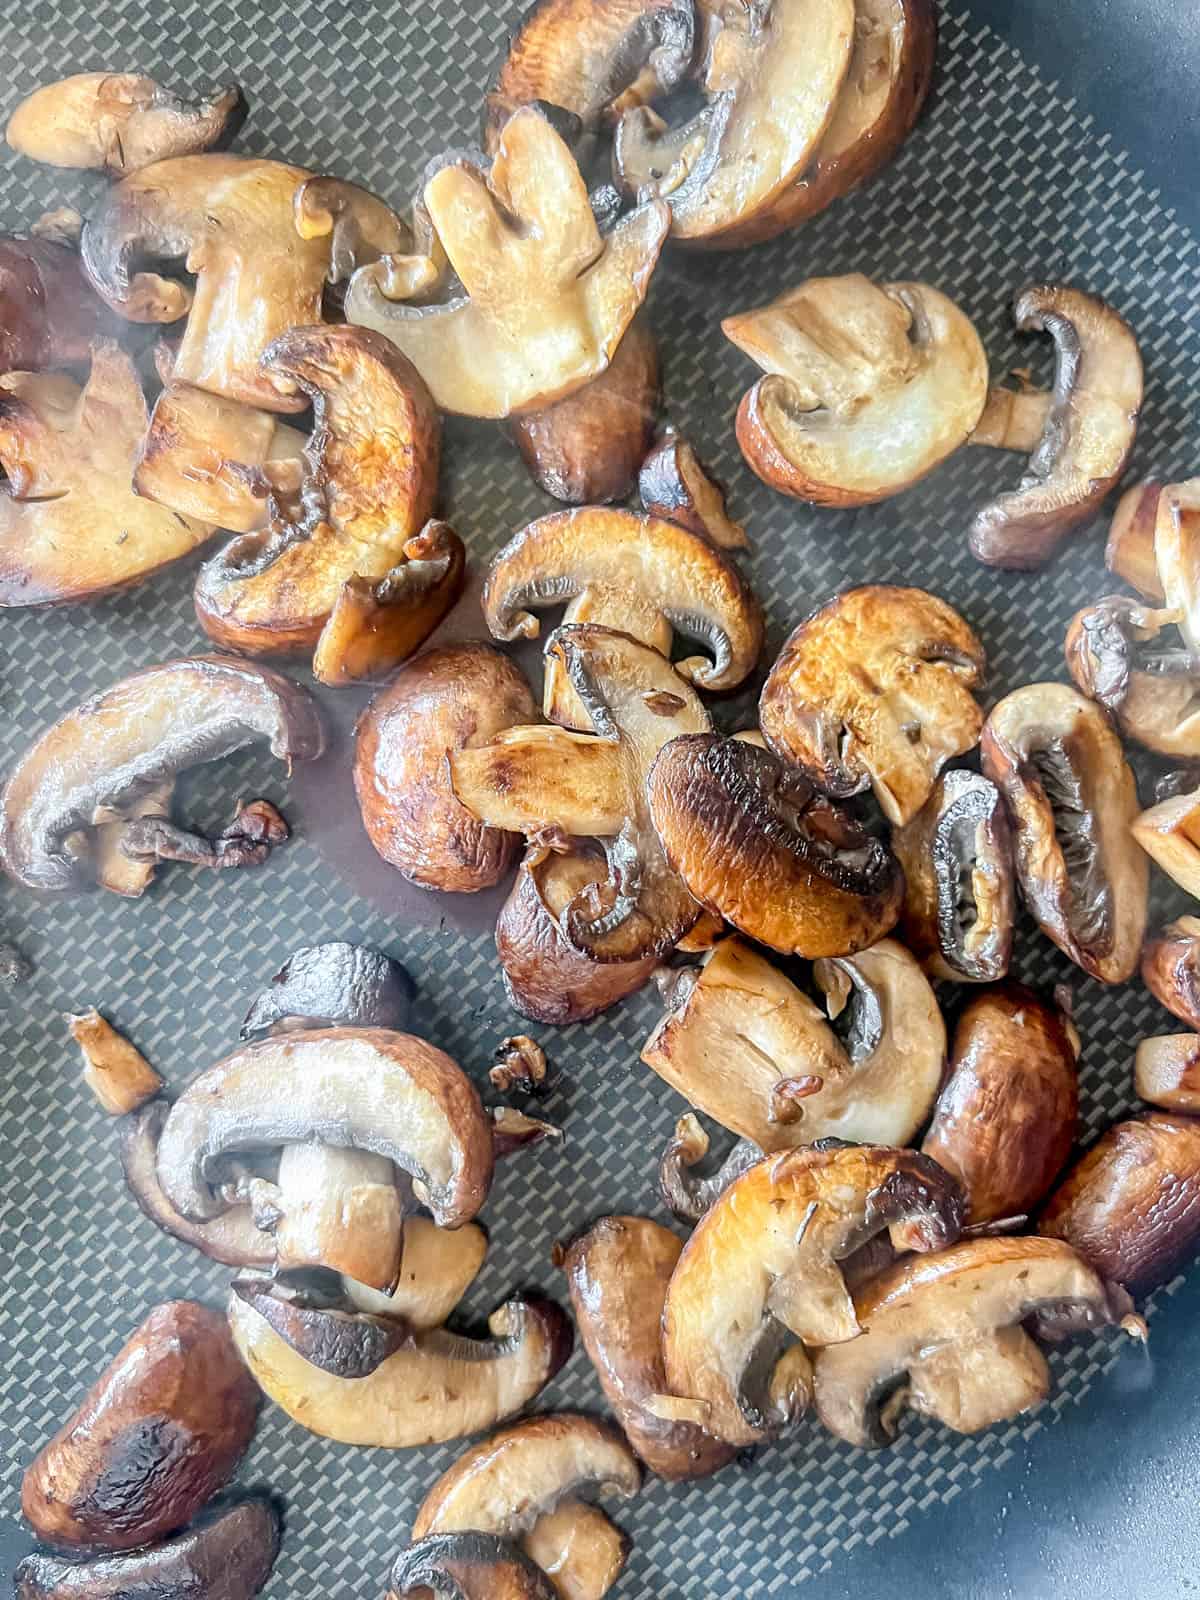 Grilled mushrooms in a pan.